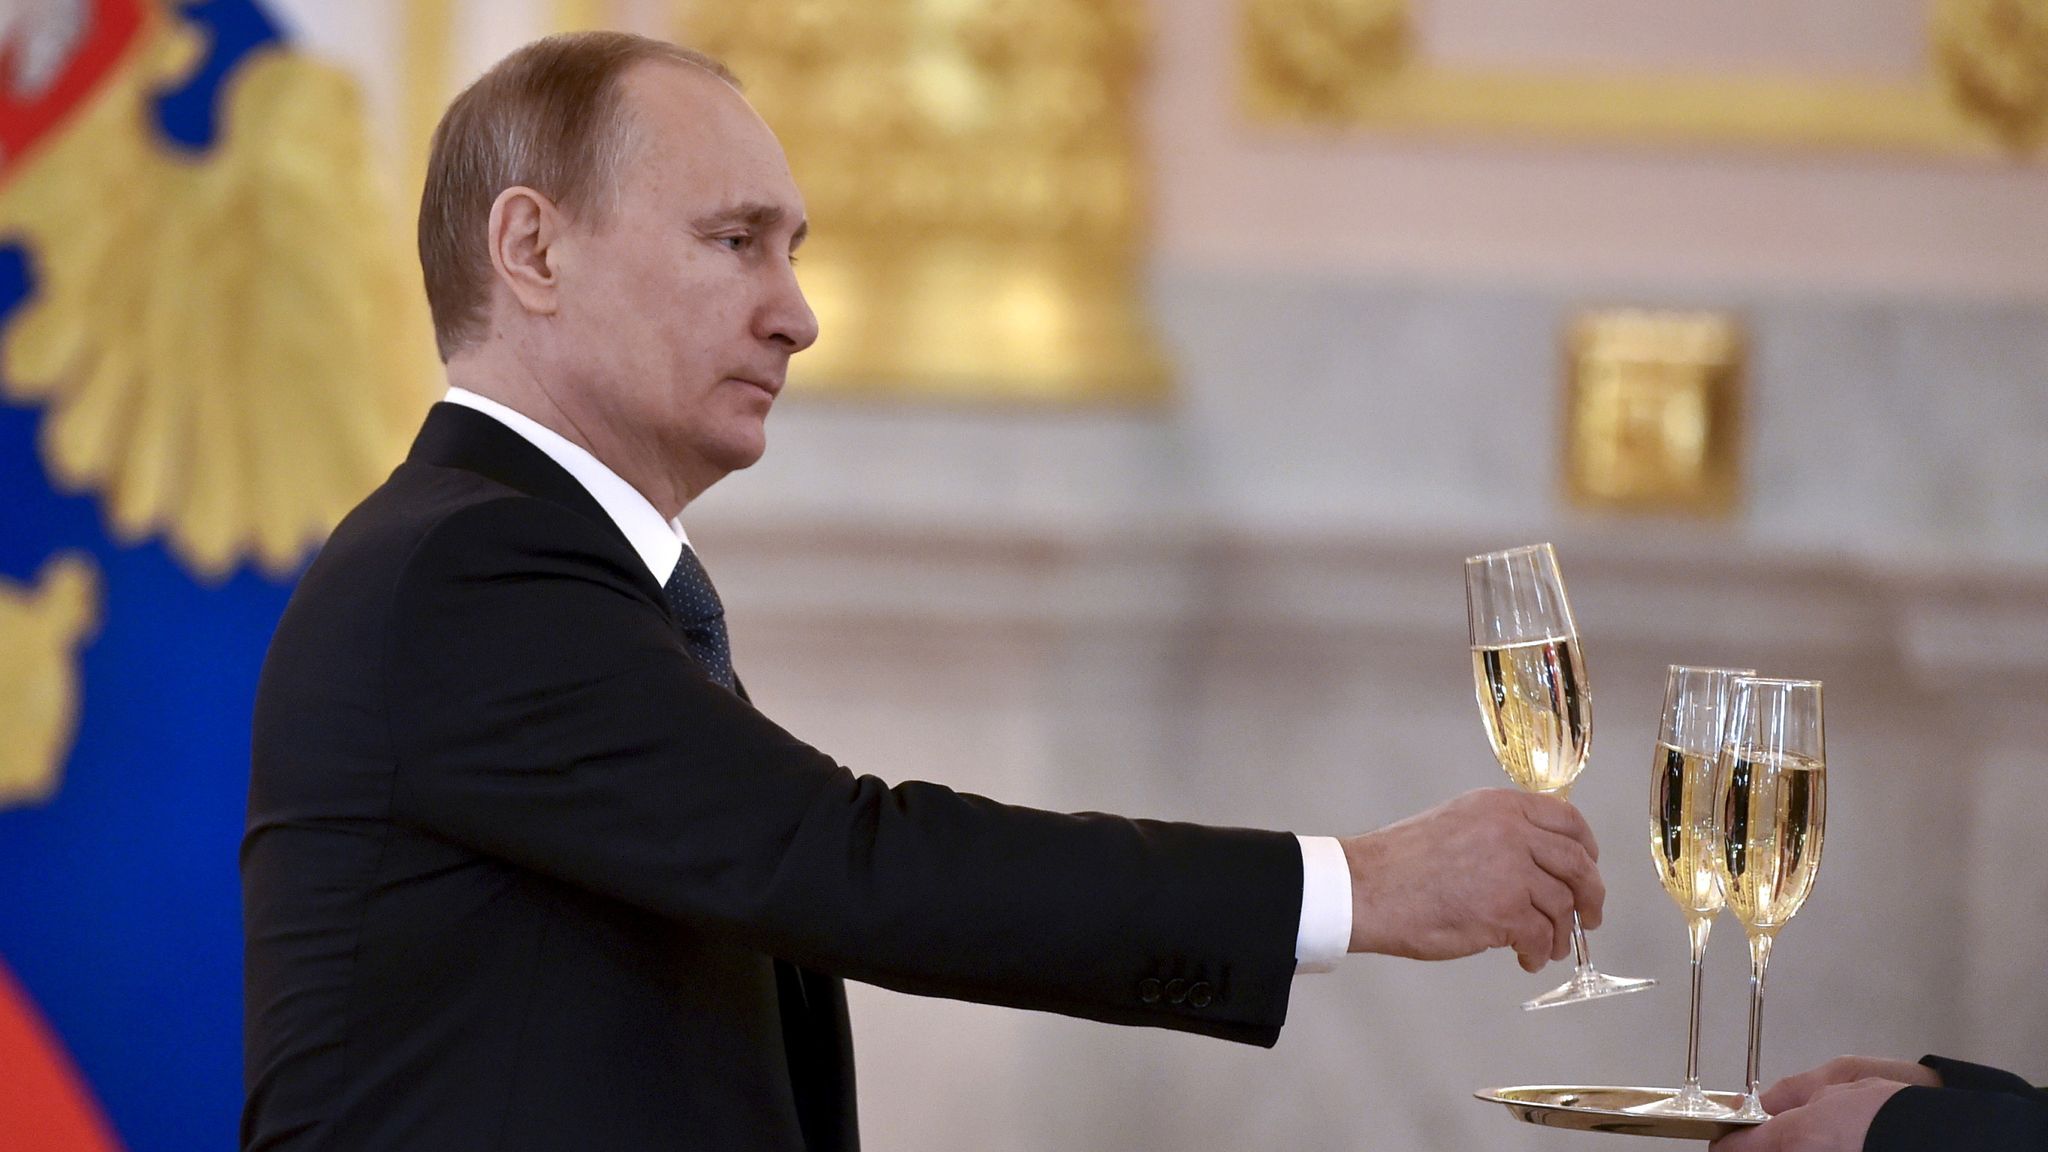 French champagne maker: we can't let Russia water down our brand